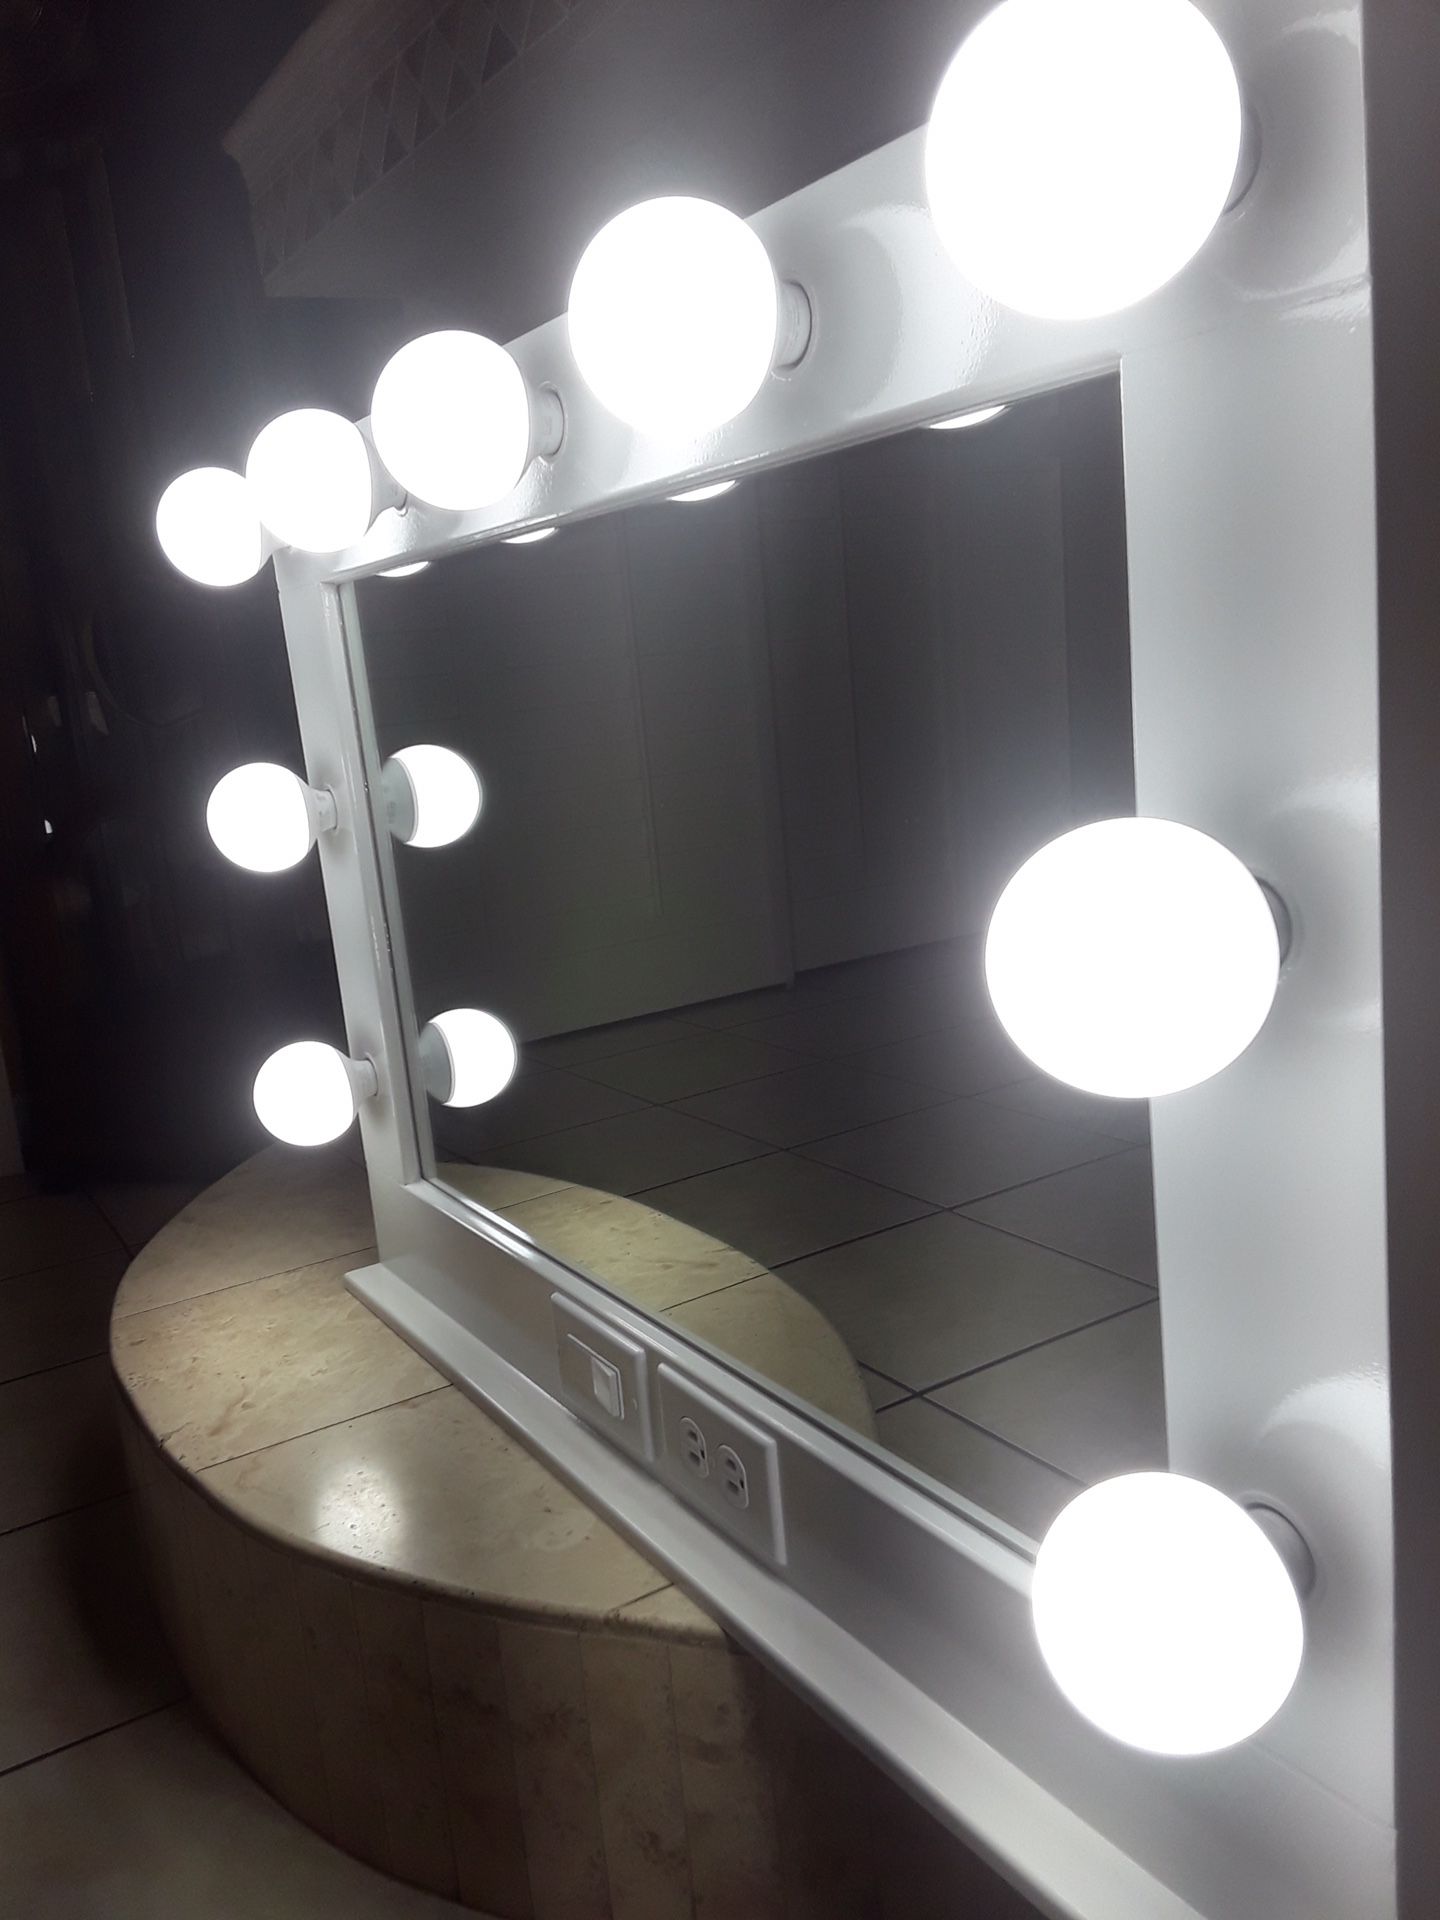 Vanity mirror with electric outlet